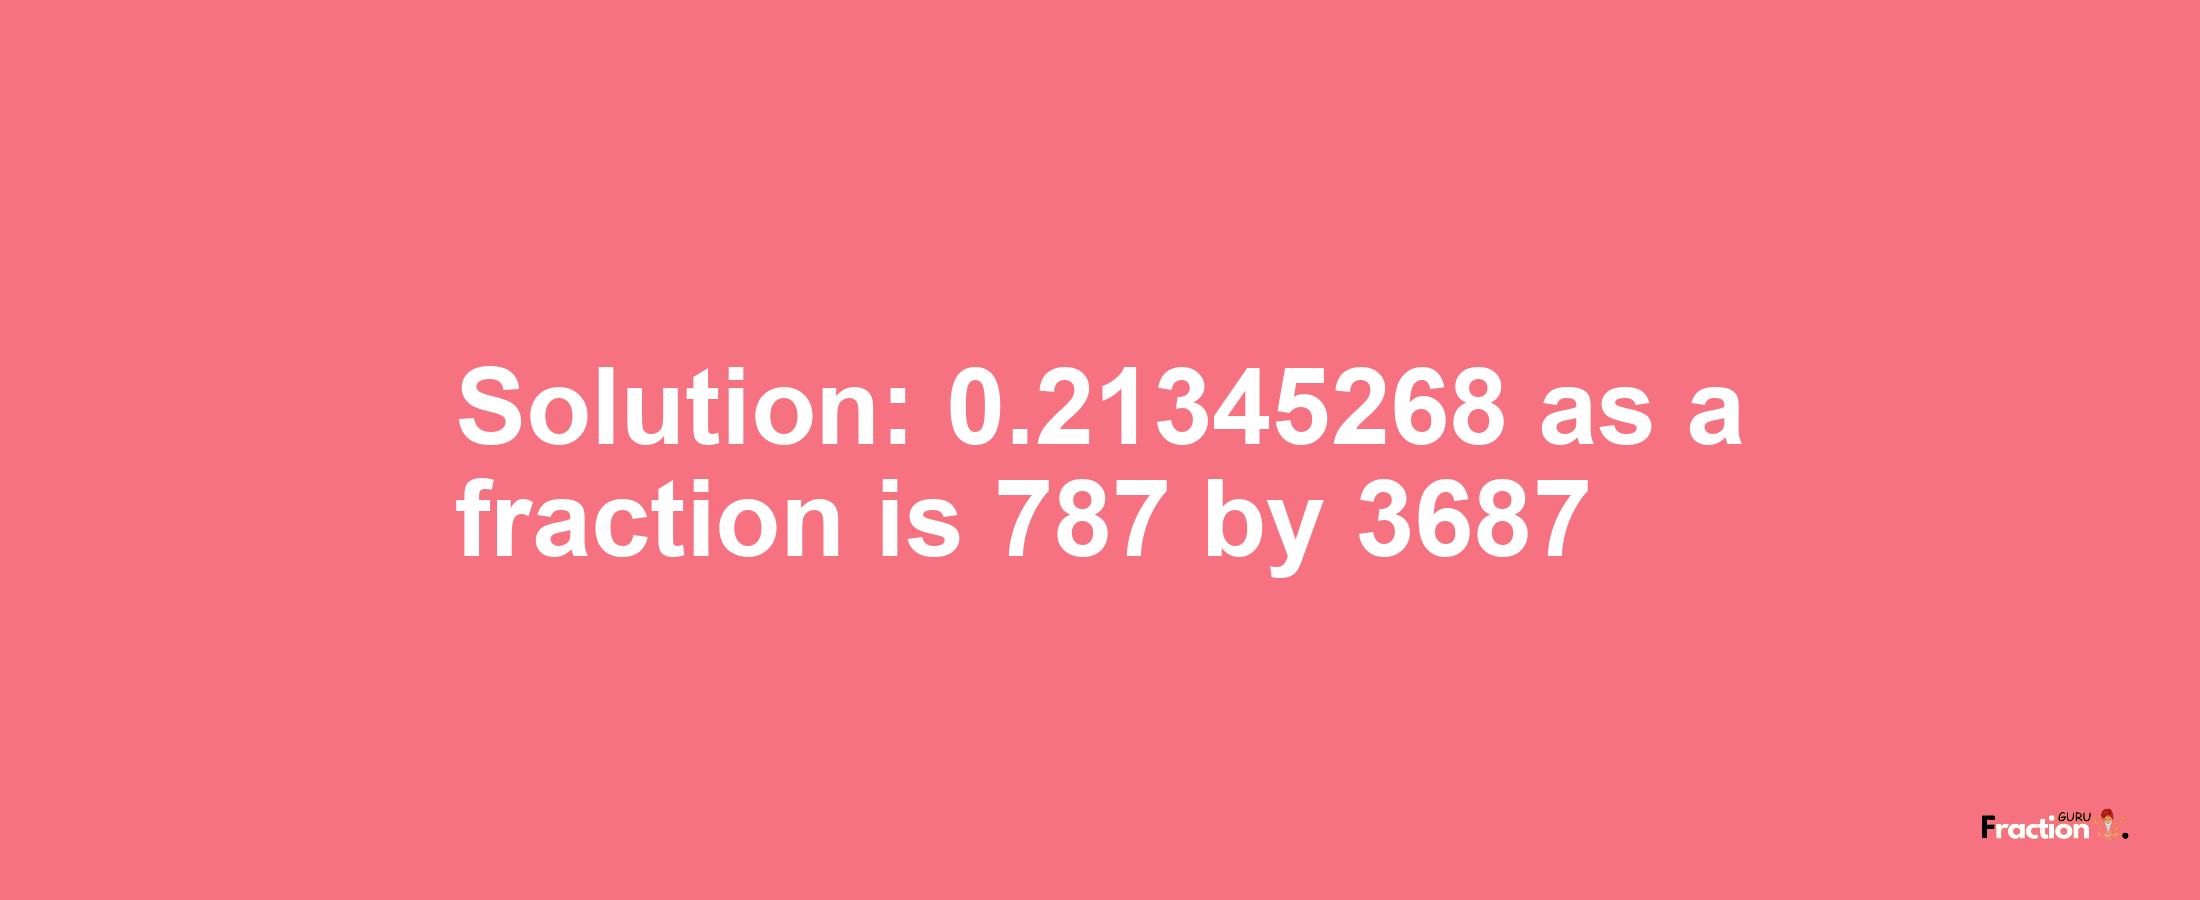 Solution:0.21345268 as a fraction is 787/3687